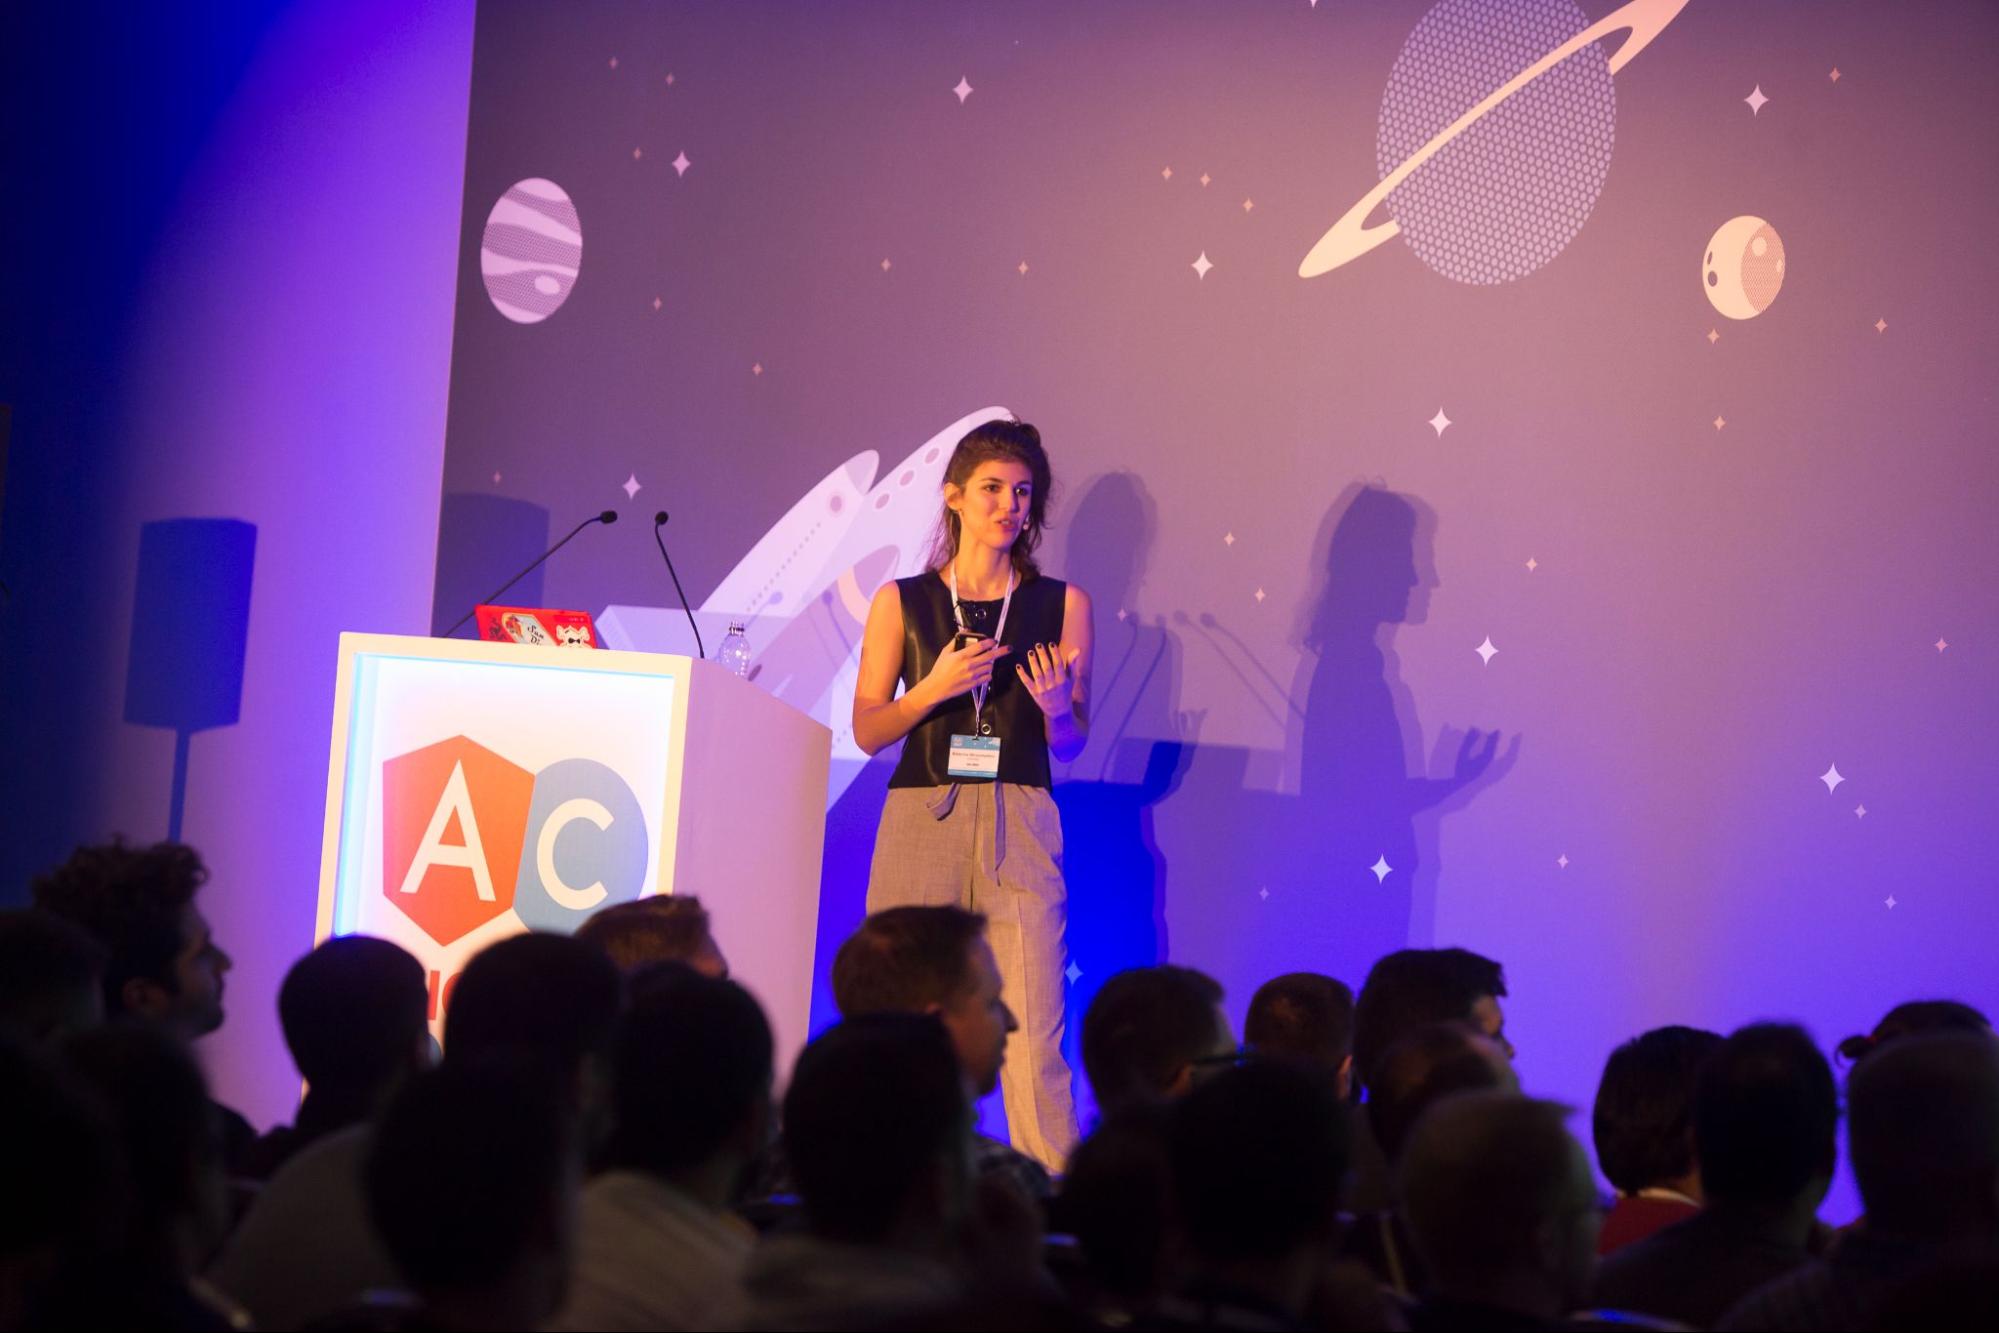 Image shows Katerina Skroumpelou presenting onstage at a conference. Behind her is a podium and a wall covered in a planetary theme